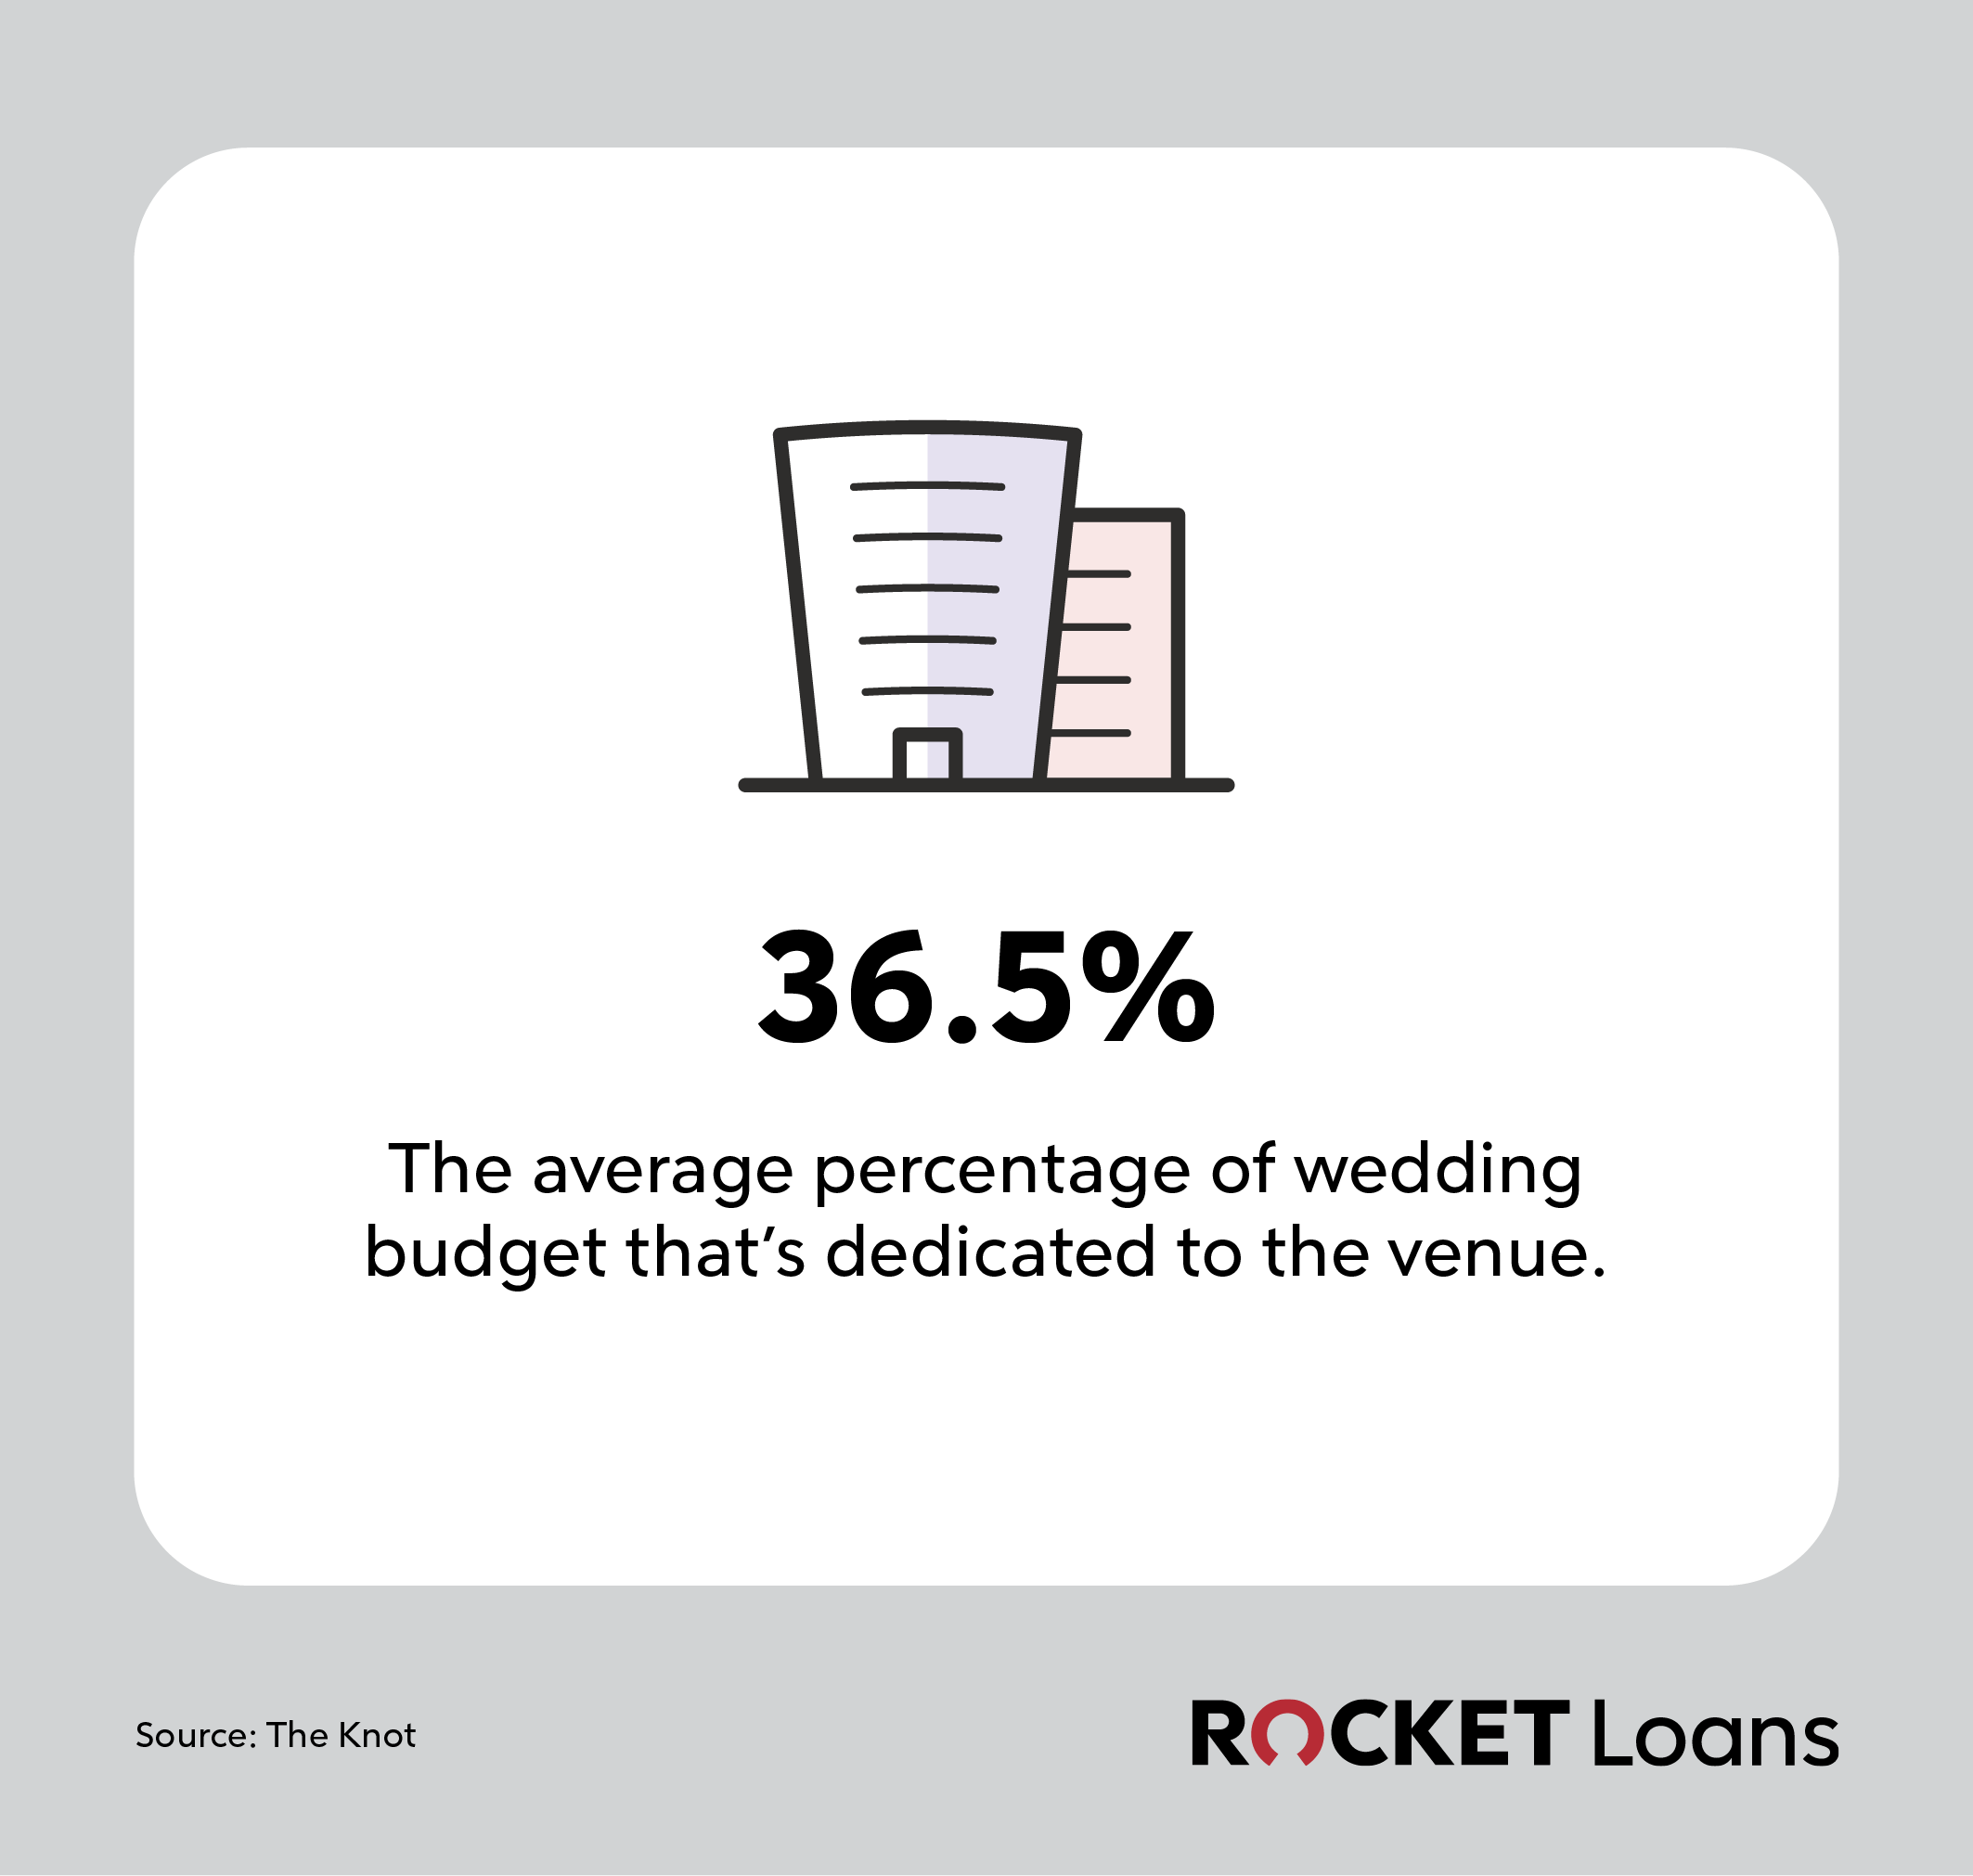 Image showing the percentage which is 36.5% of a wedding budget is dedicated to the venue.